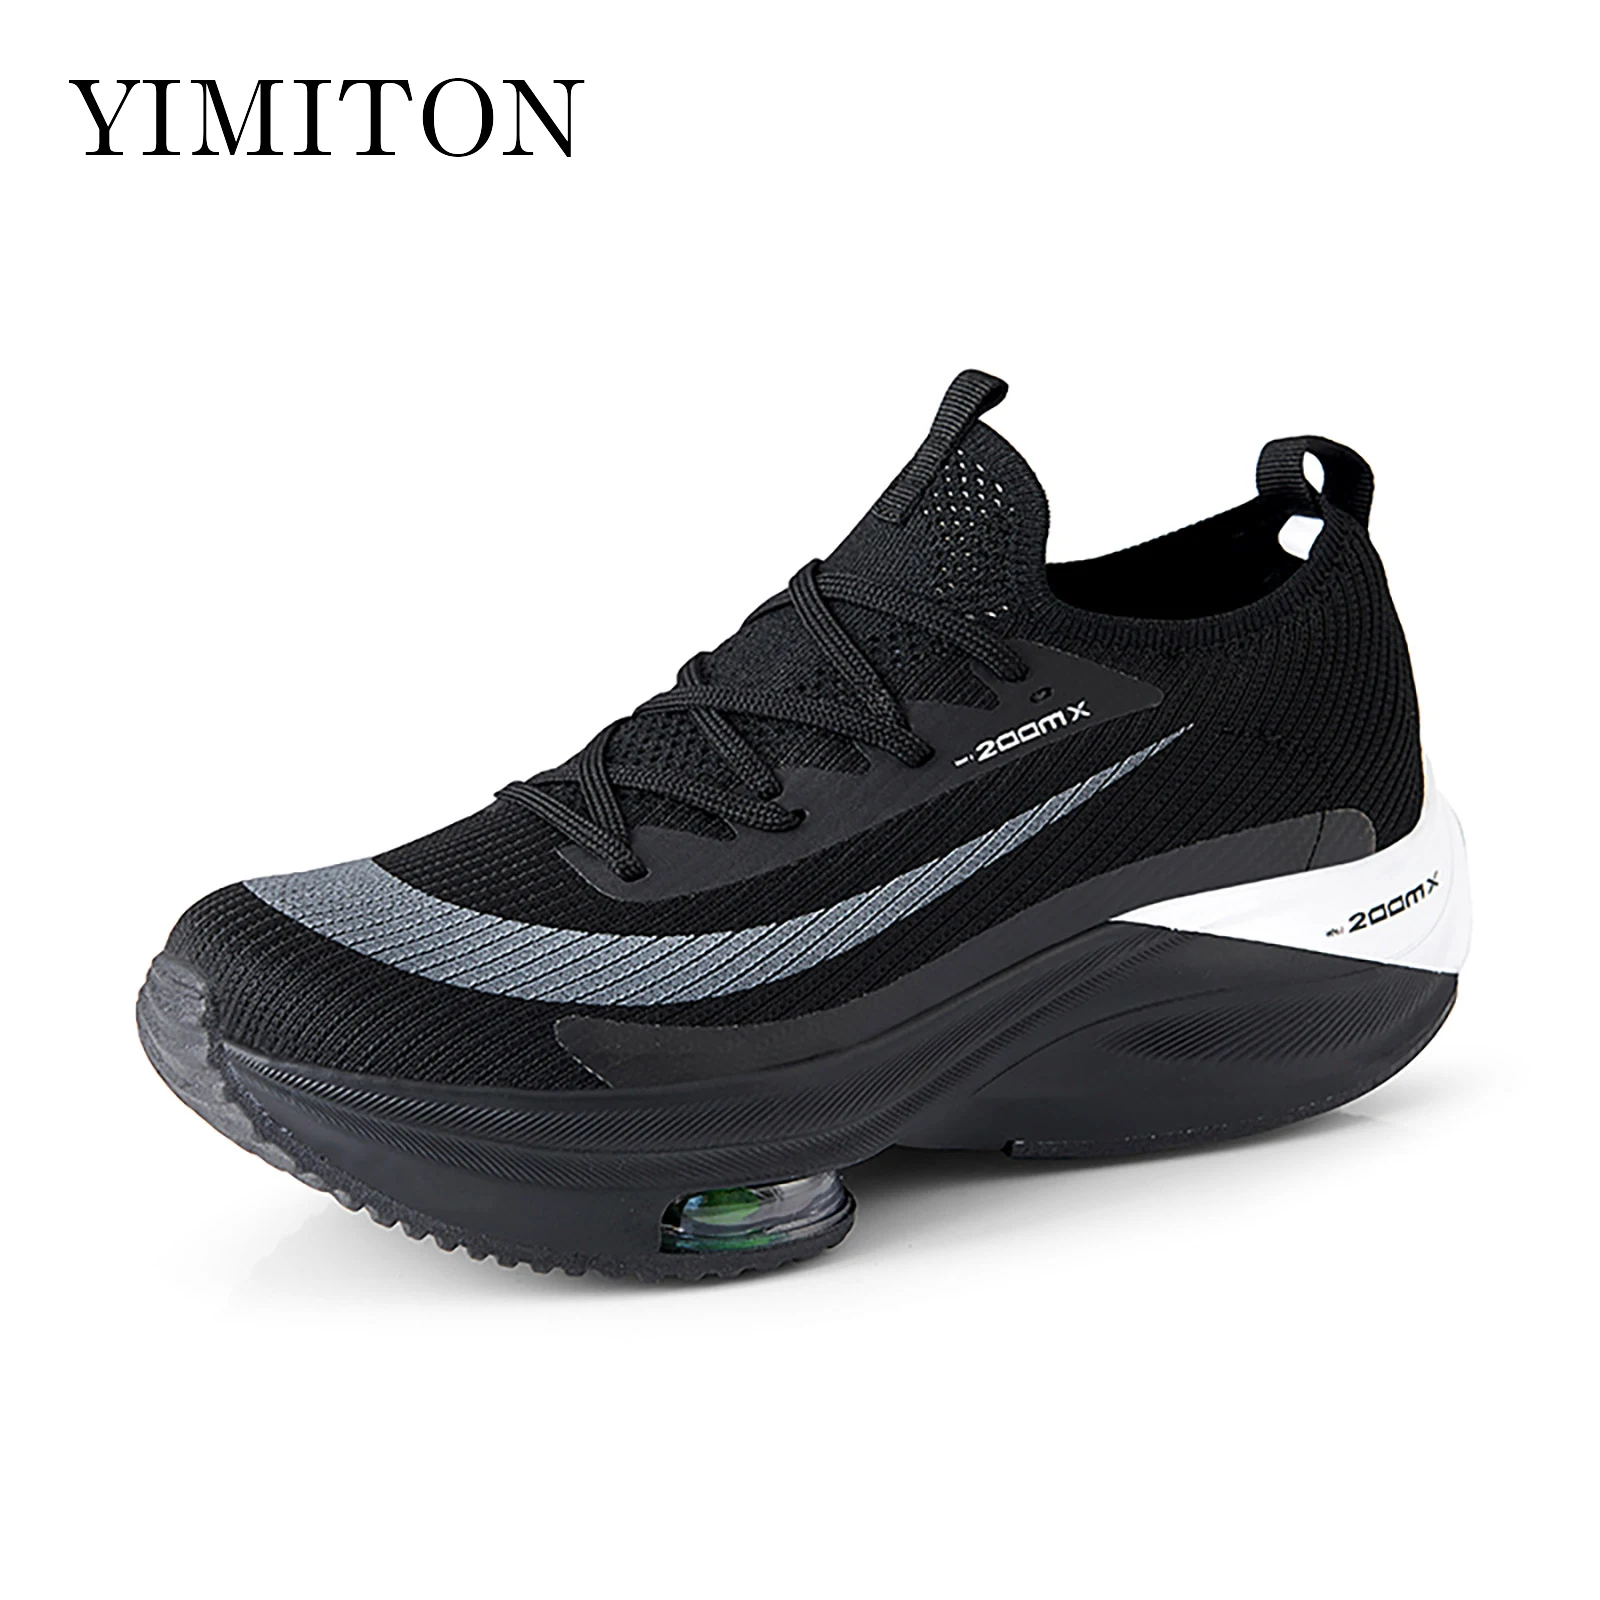 Yimiton Air Cushion Non-Slip Gym Sneakers for Men Women Lightweight Breathable Athletic Running Walking Tennis Shoes 36-46